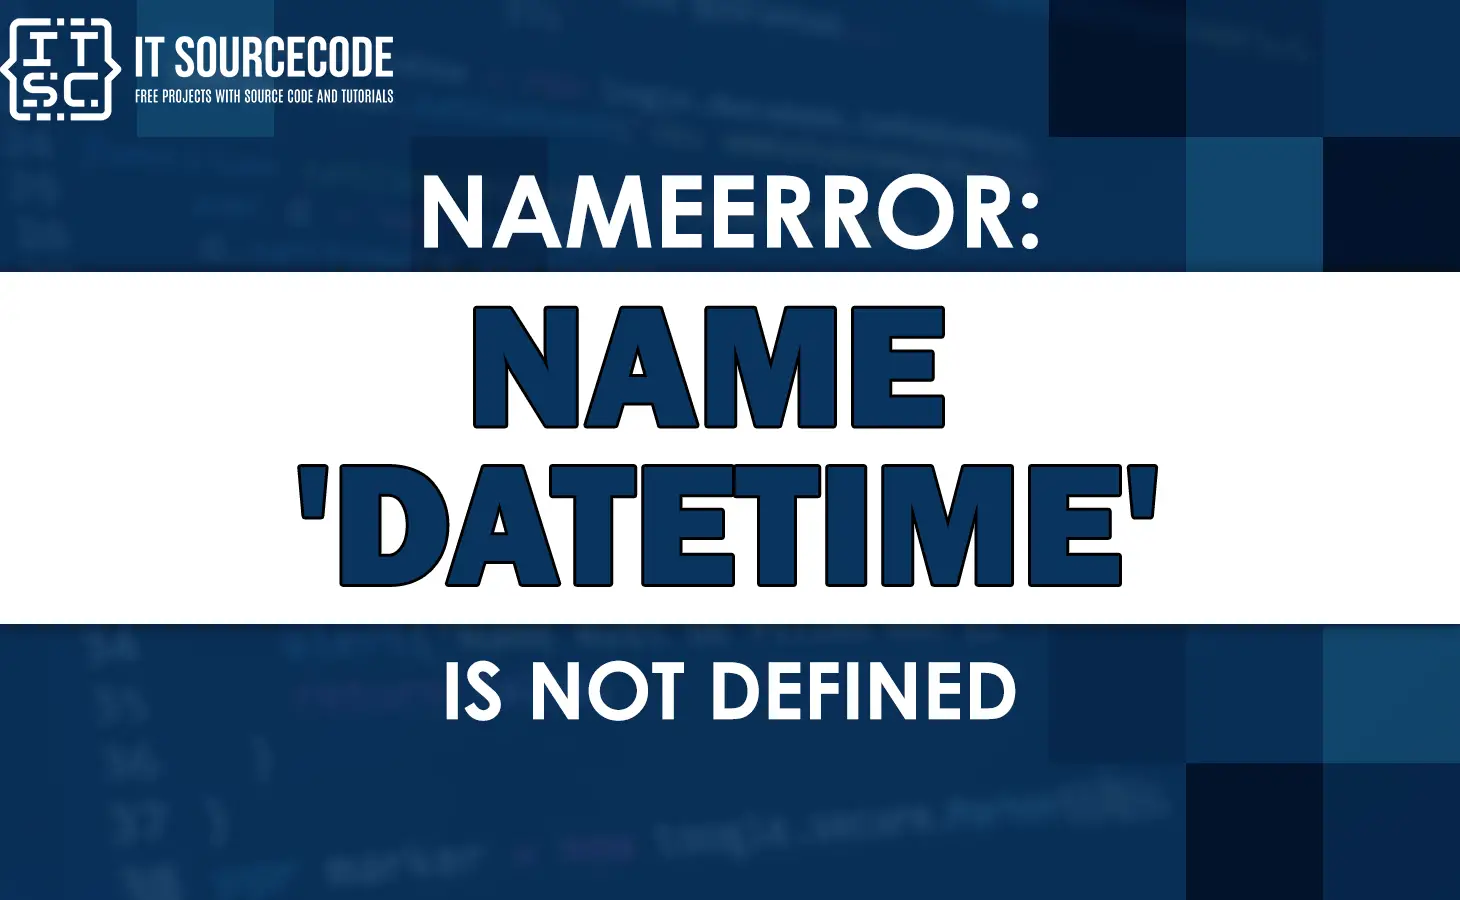 Nameerror: name 'datetime' is not defined